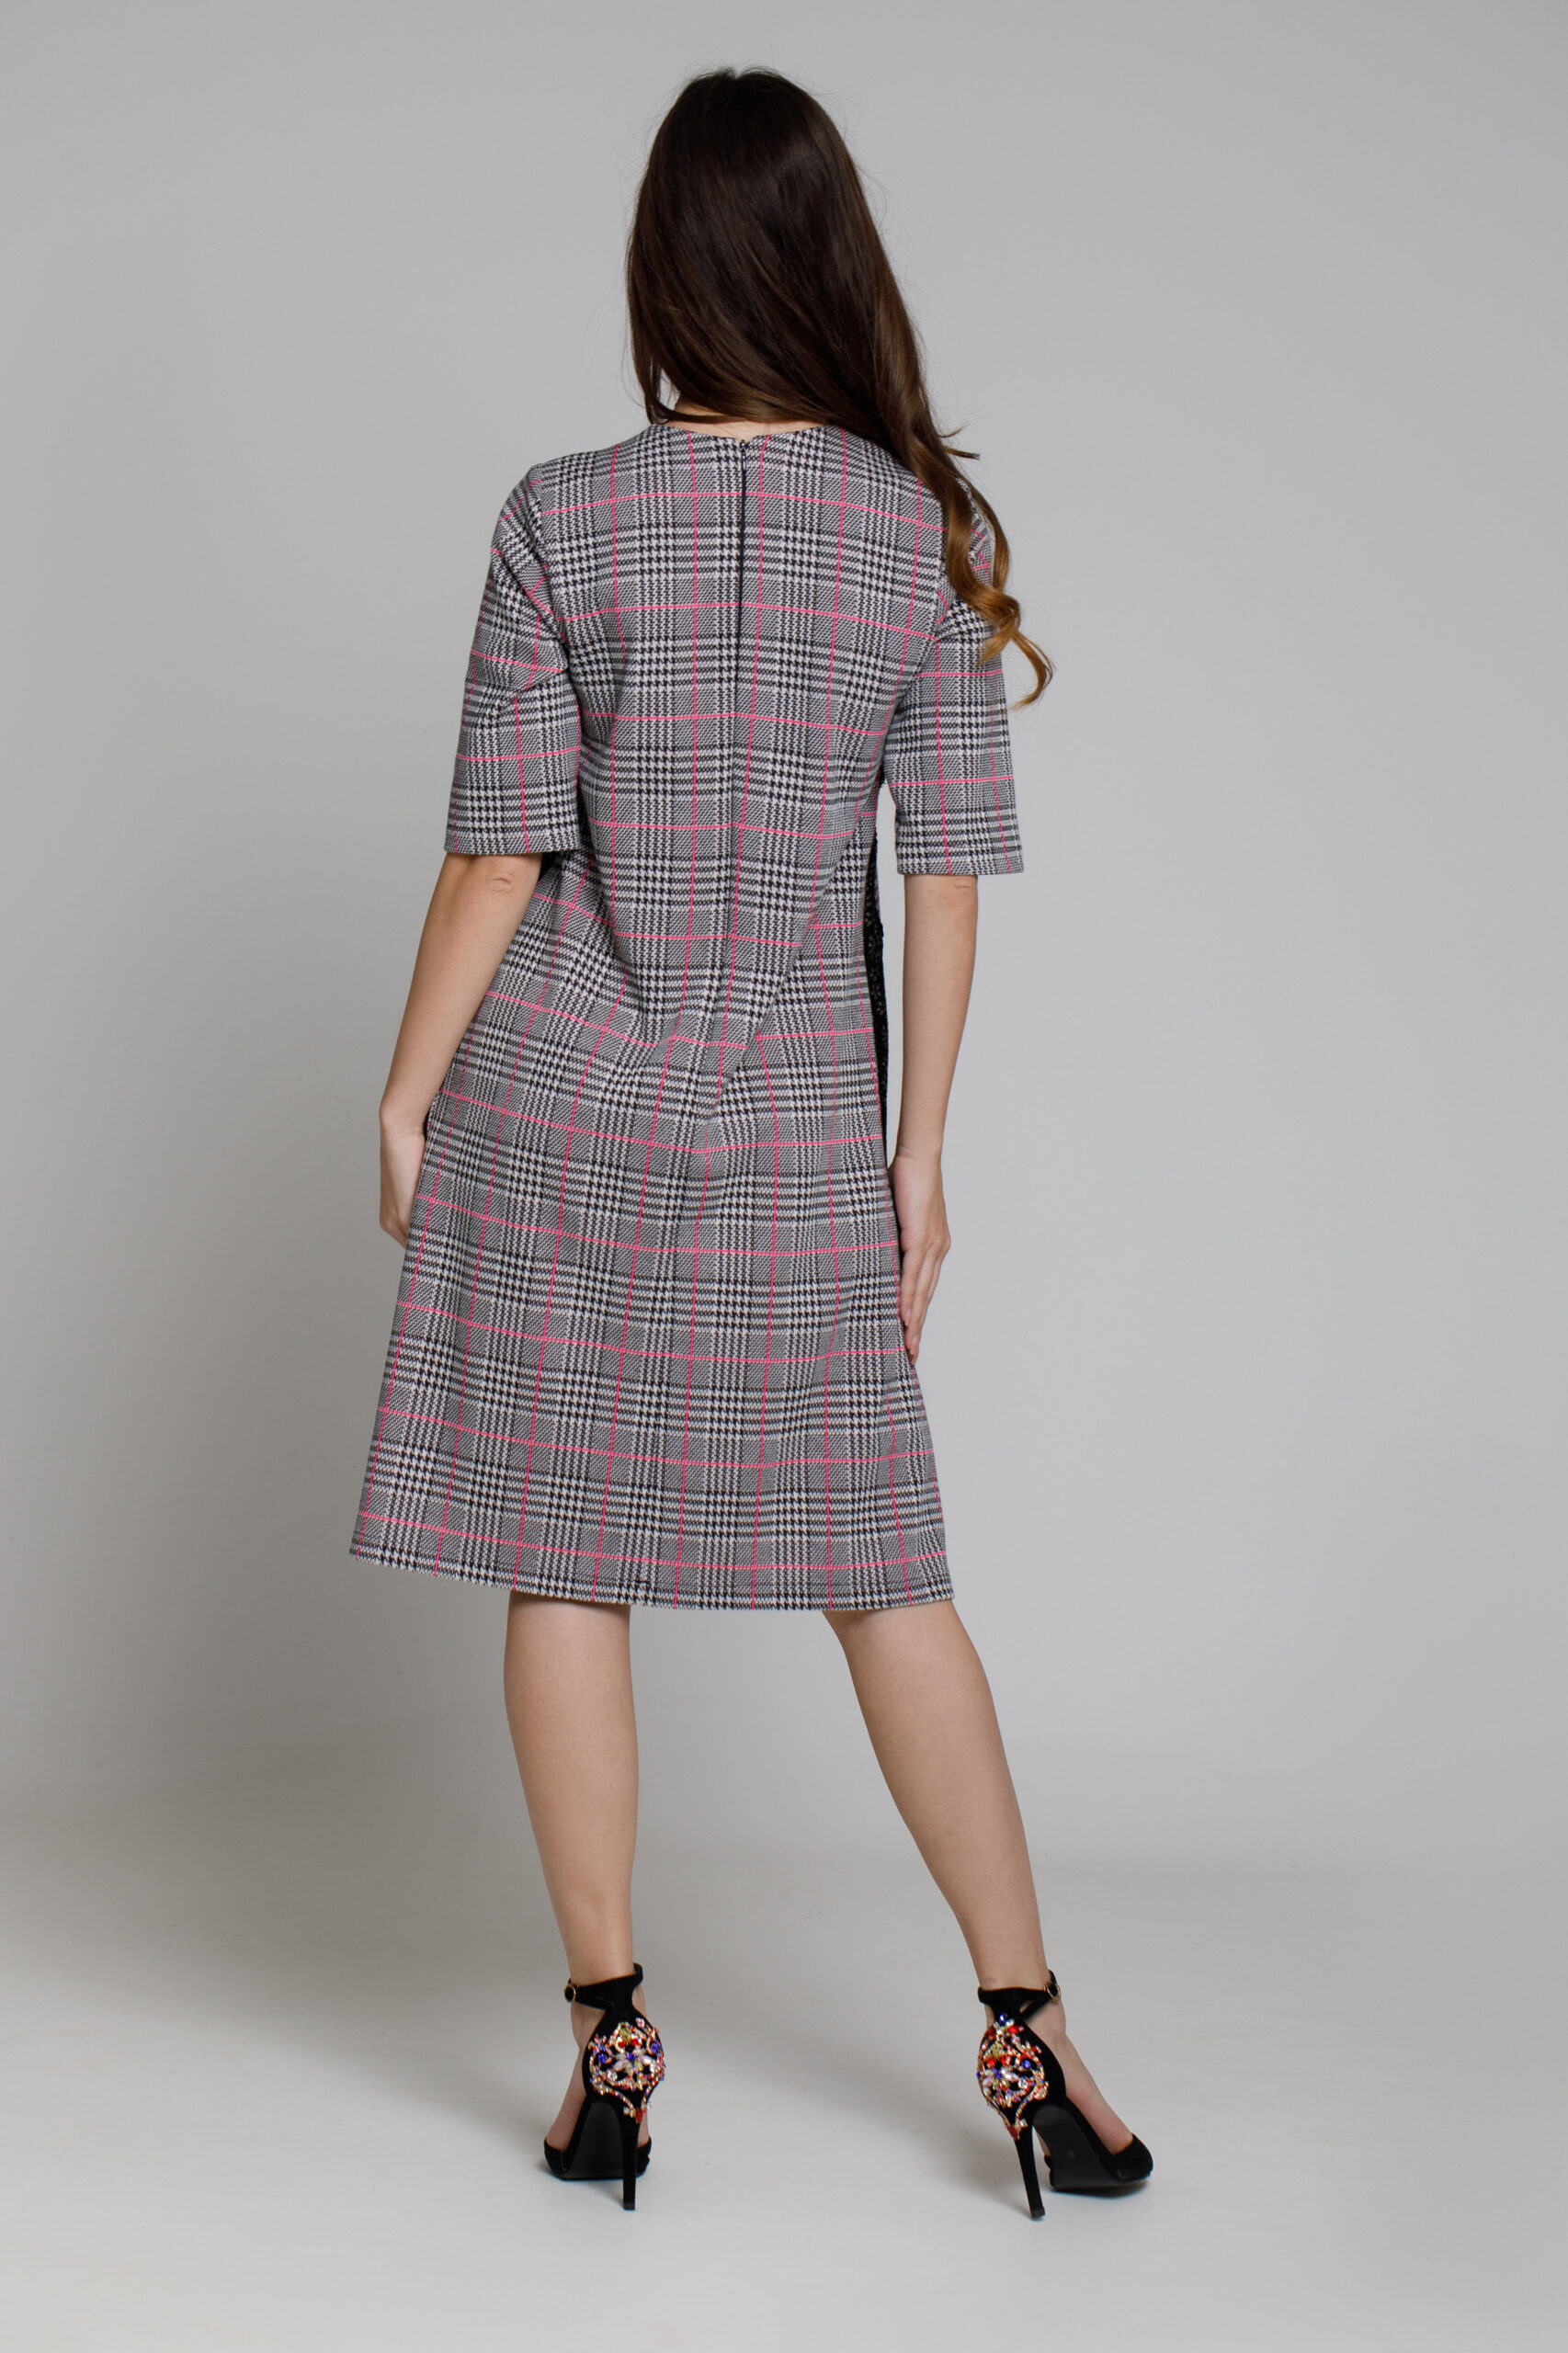 ARELLA dress in check fabric AND PINK STRIPES. Natural fabrics, original design, handmade embroidery